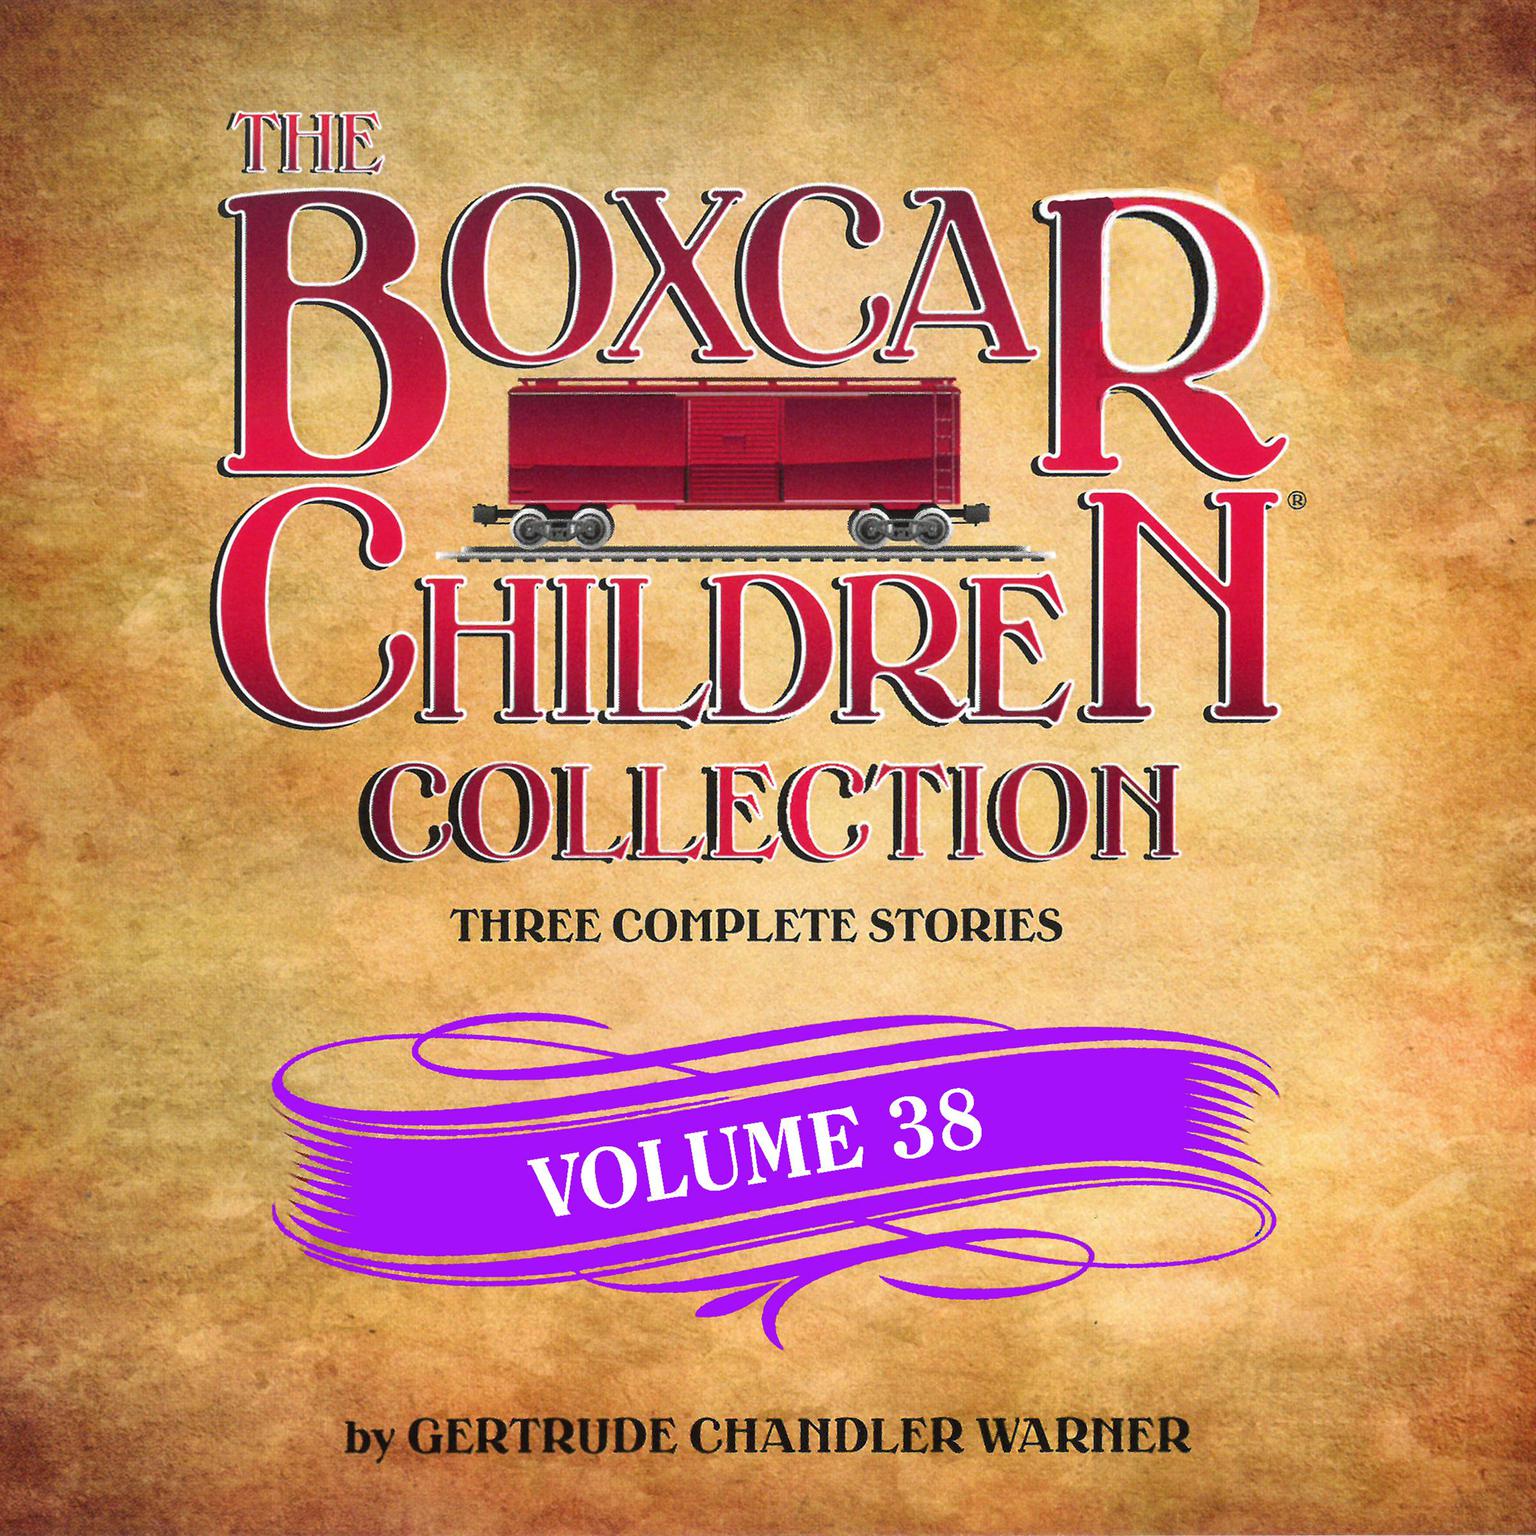 The Boxcar Children Collection Volume 38: The Ghost in the First Row, The Box that Watch Found, A Horse Named Dragon Audiobook, by Gertrude Chandler Warner